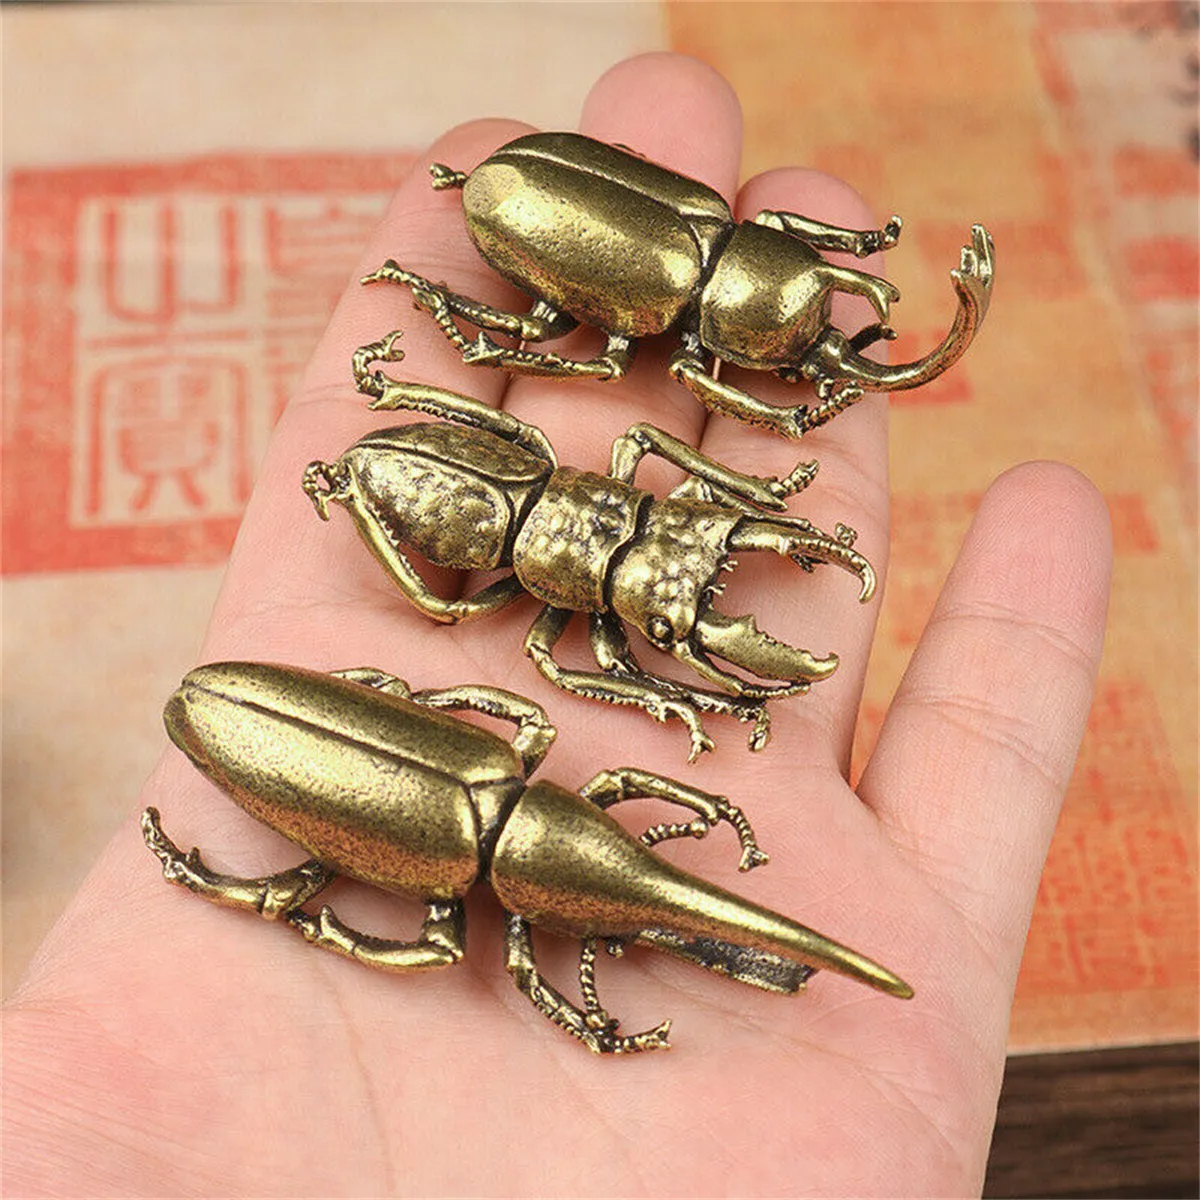 Solid Brass Insect Figurine Small Insect Statue House Ornament Animal Figurines Home Supplies